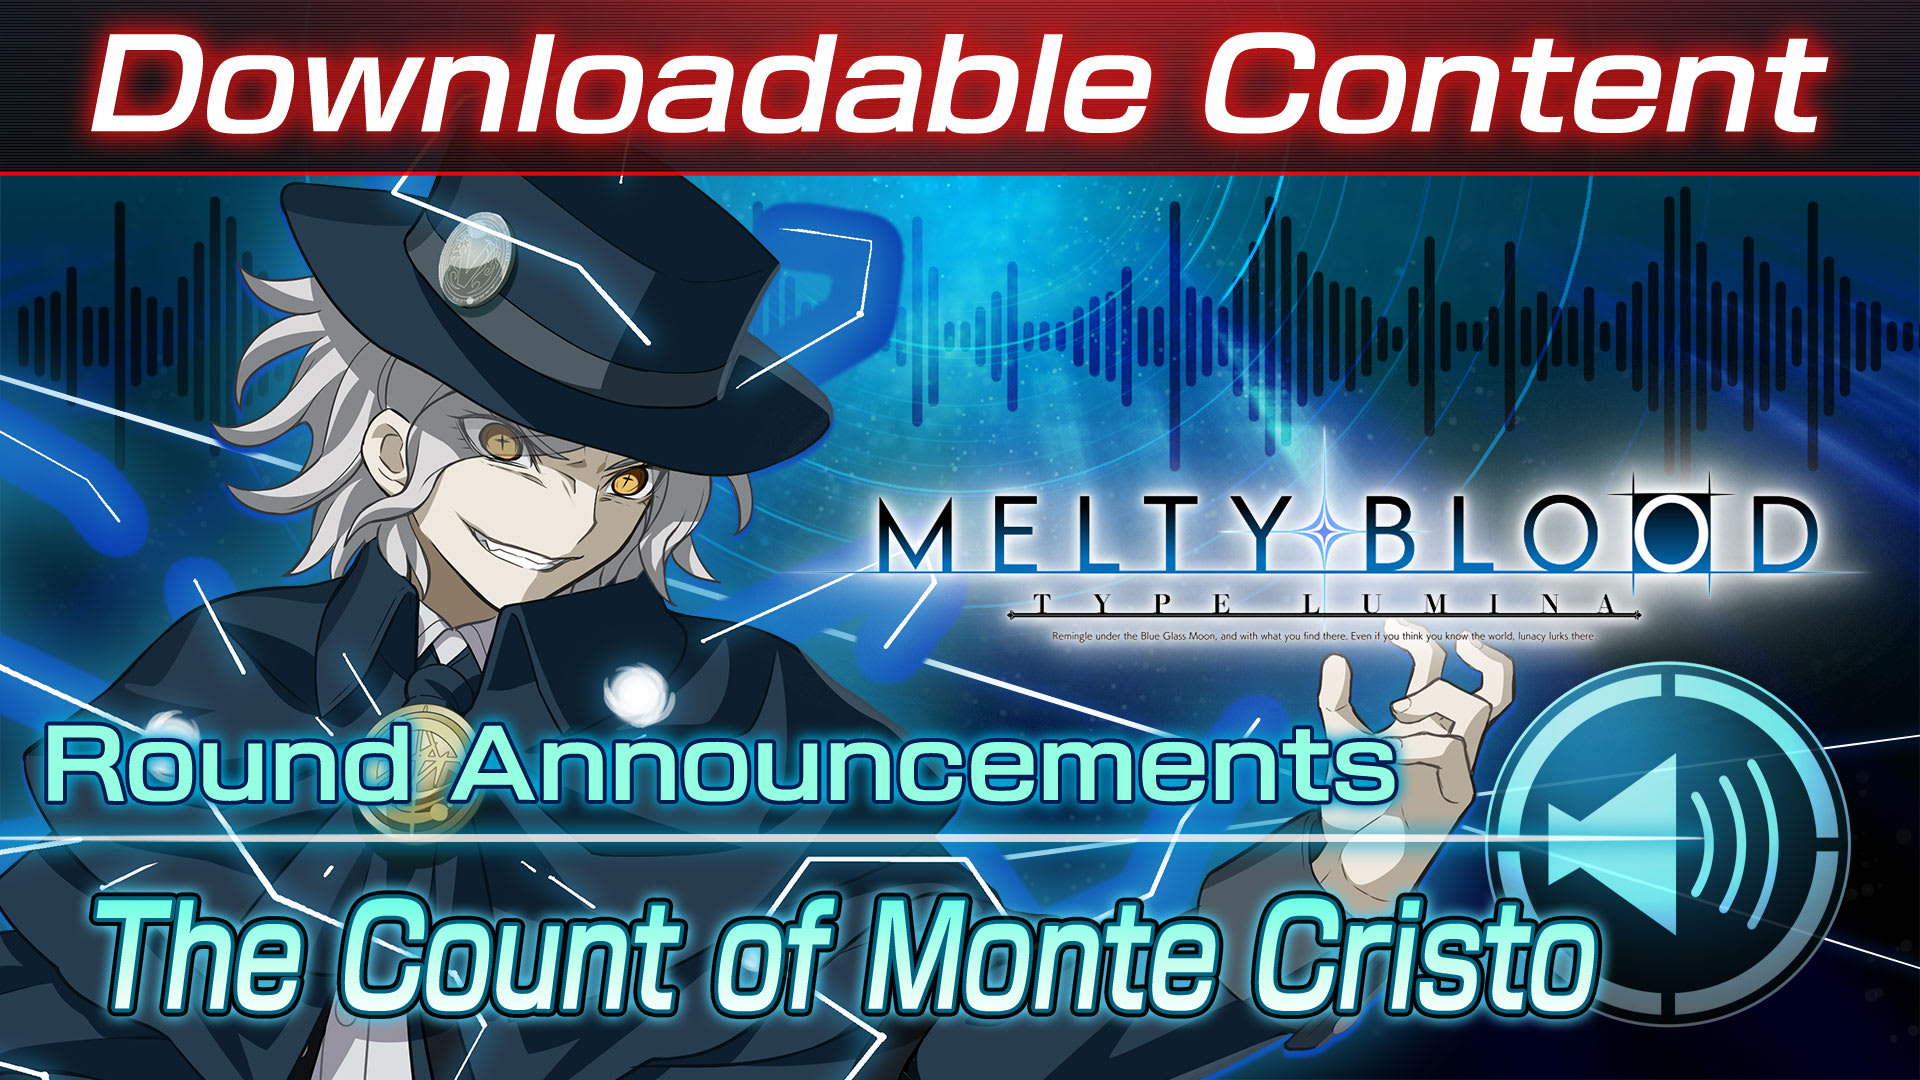 DLC: The Count of Monte Cristo Round Announcements 1